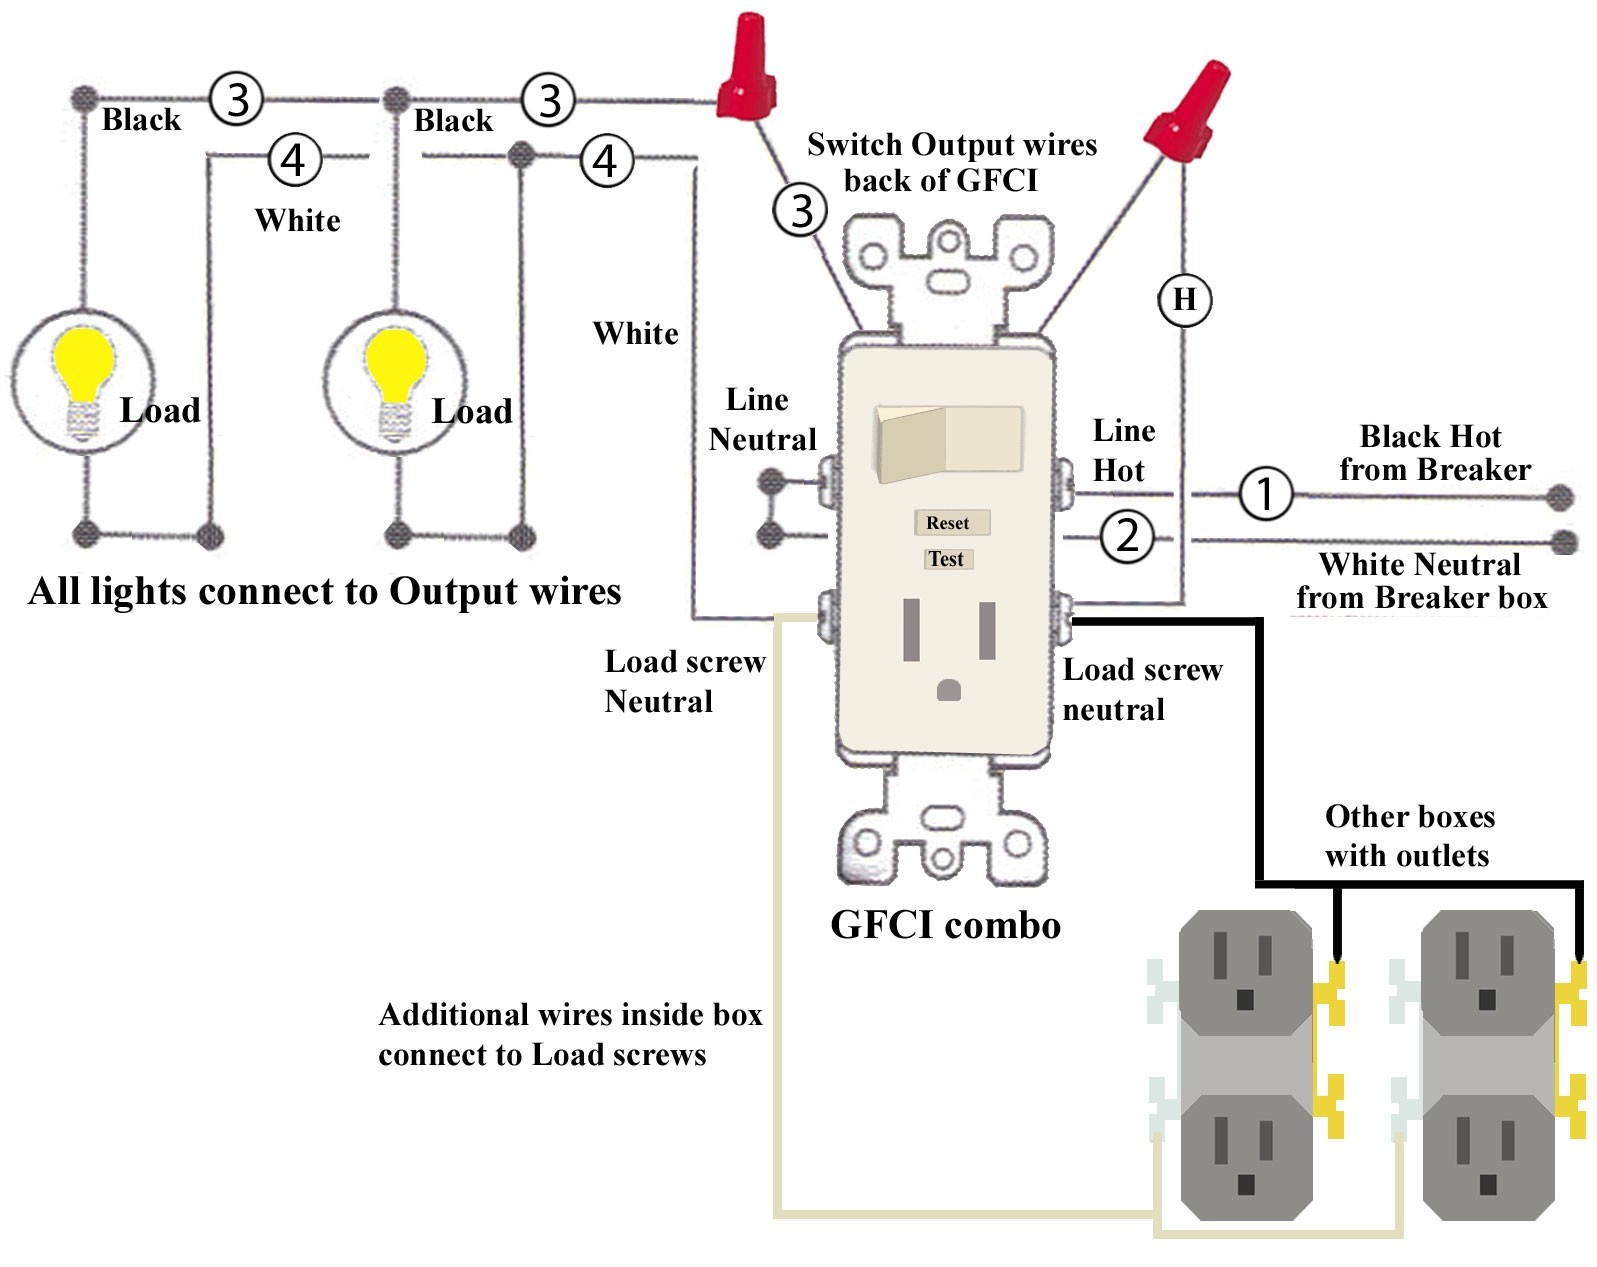 Wiring Diagrams for A Gfci bo Switch Best Wiring Diagram Outlet to Switch Save How to